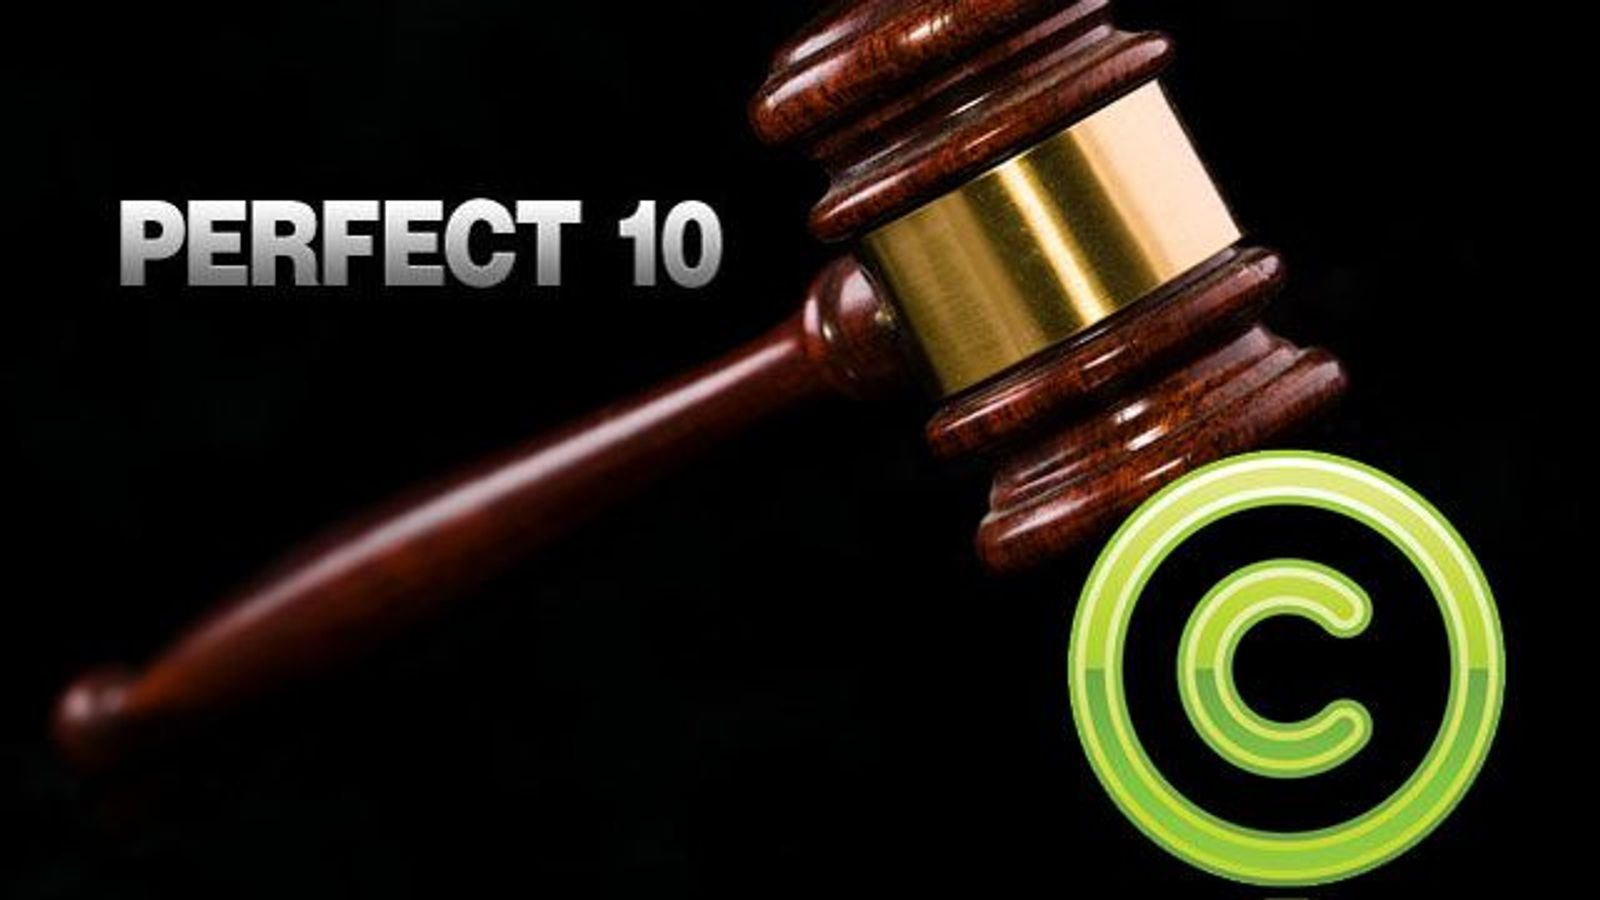 Giganews Scores Massive Legal Fee Win Over Perfect 10